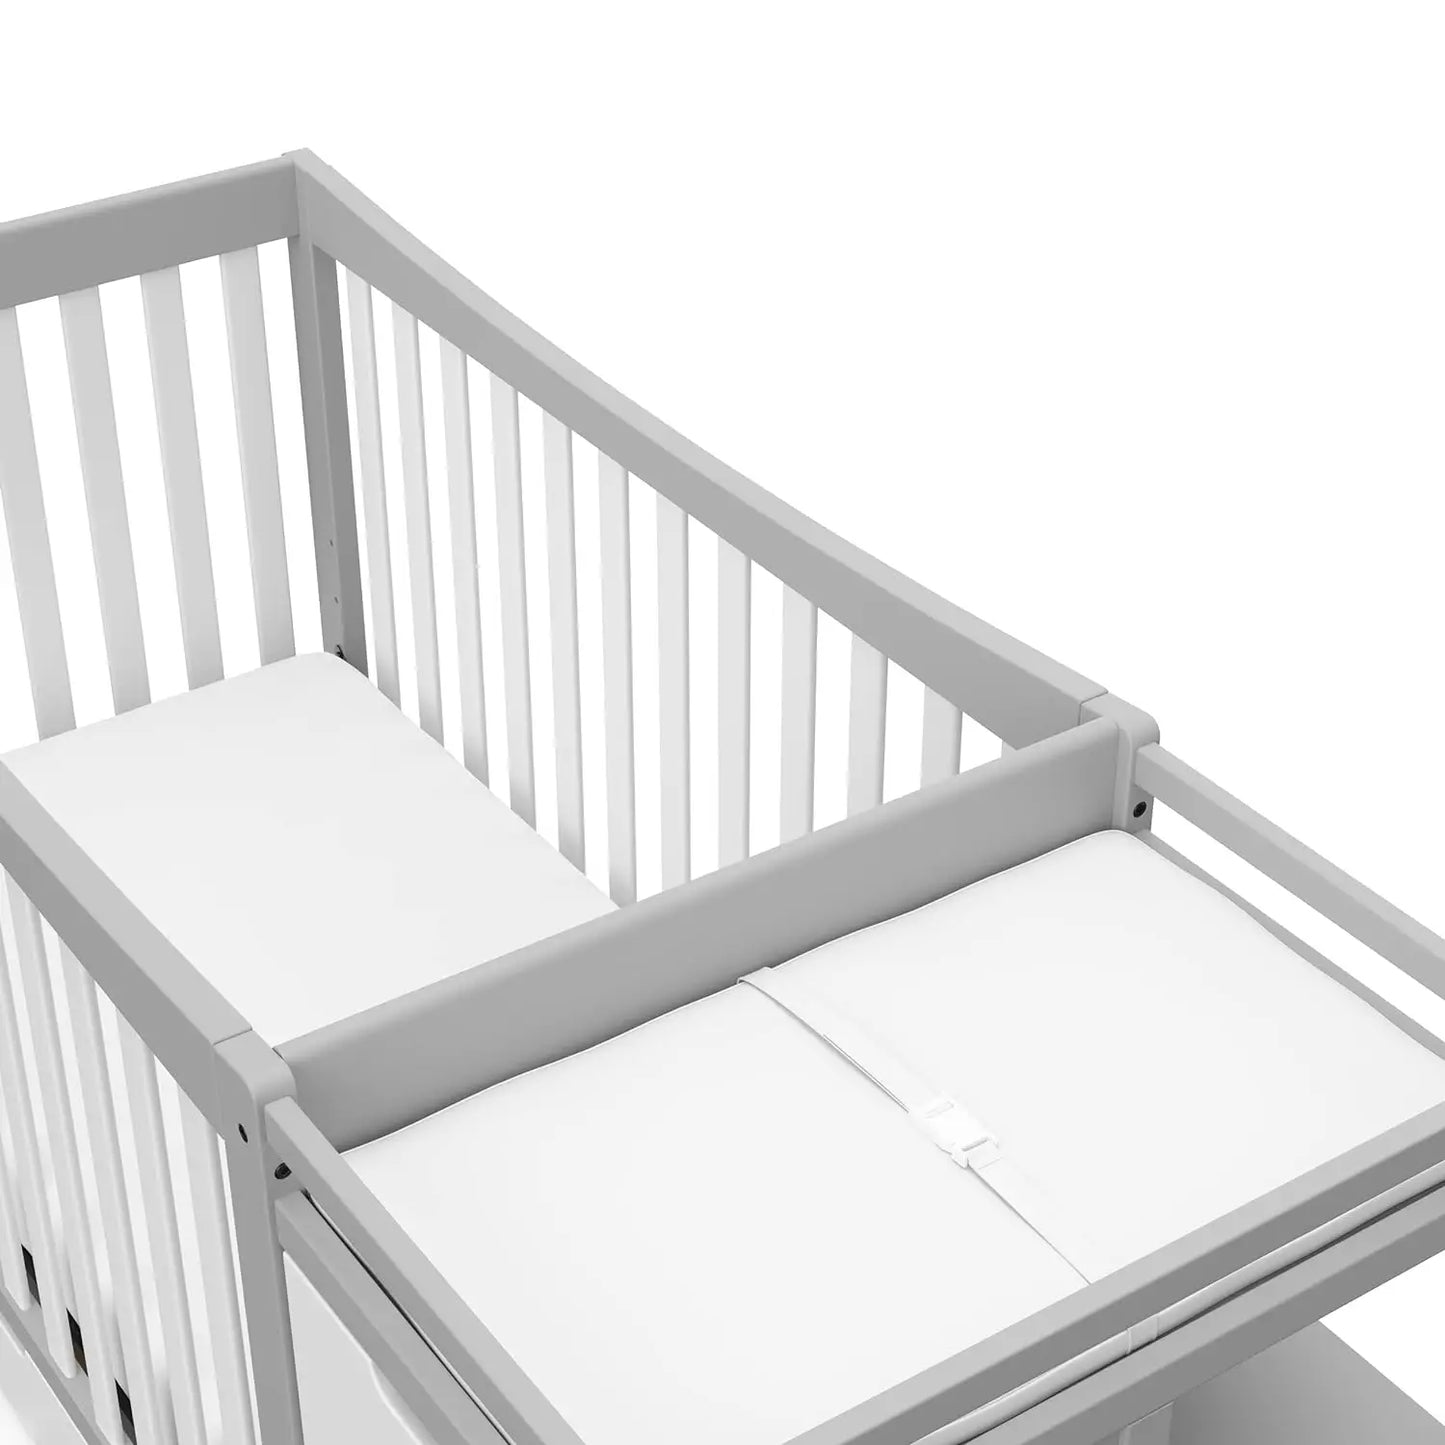 Maximo 5-In-1 Convertible Crib & Changer With Drawer